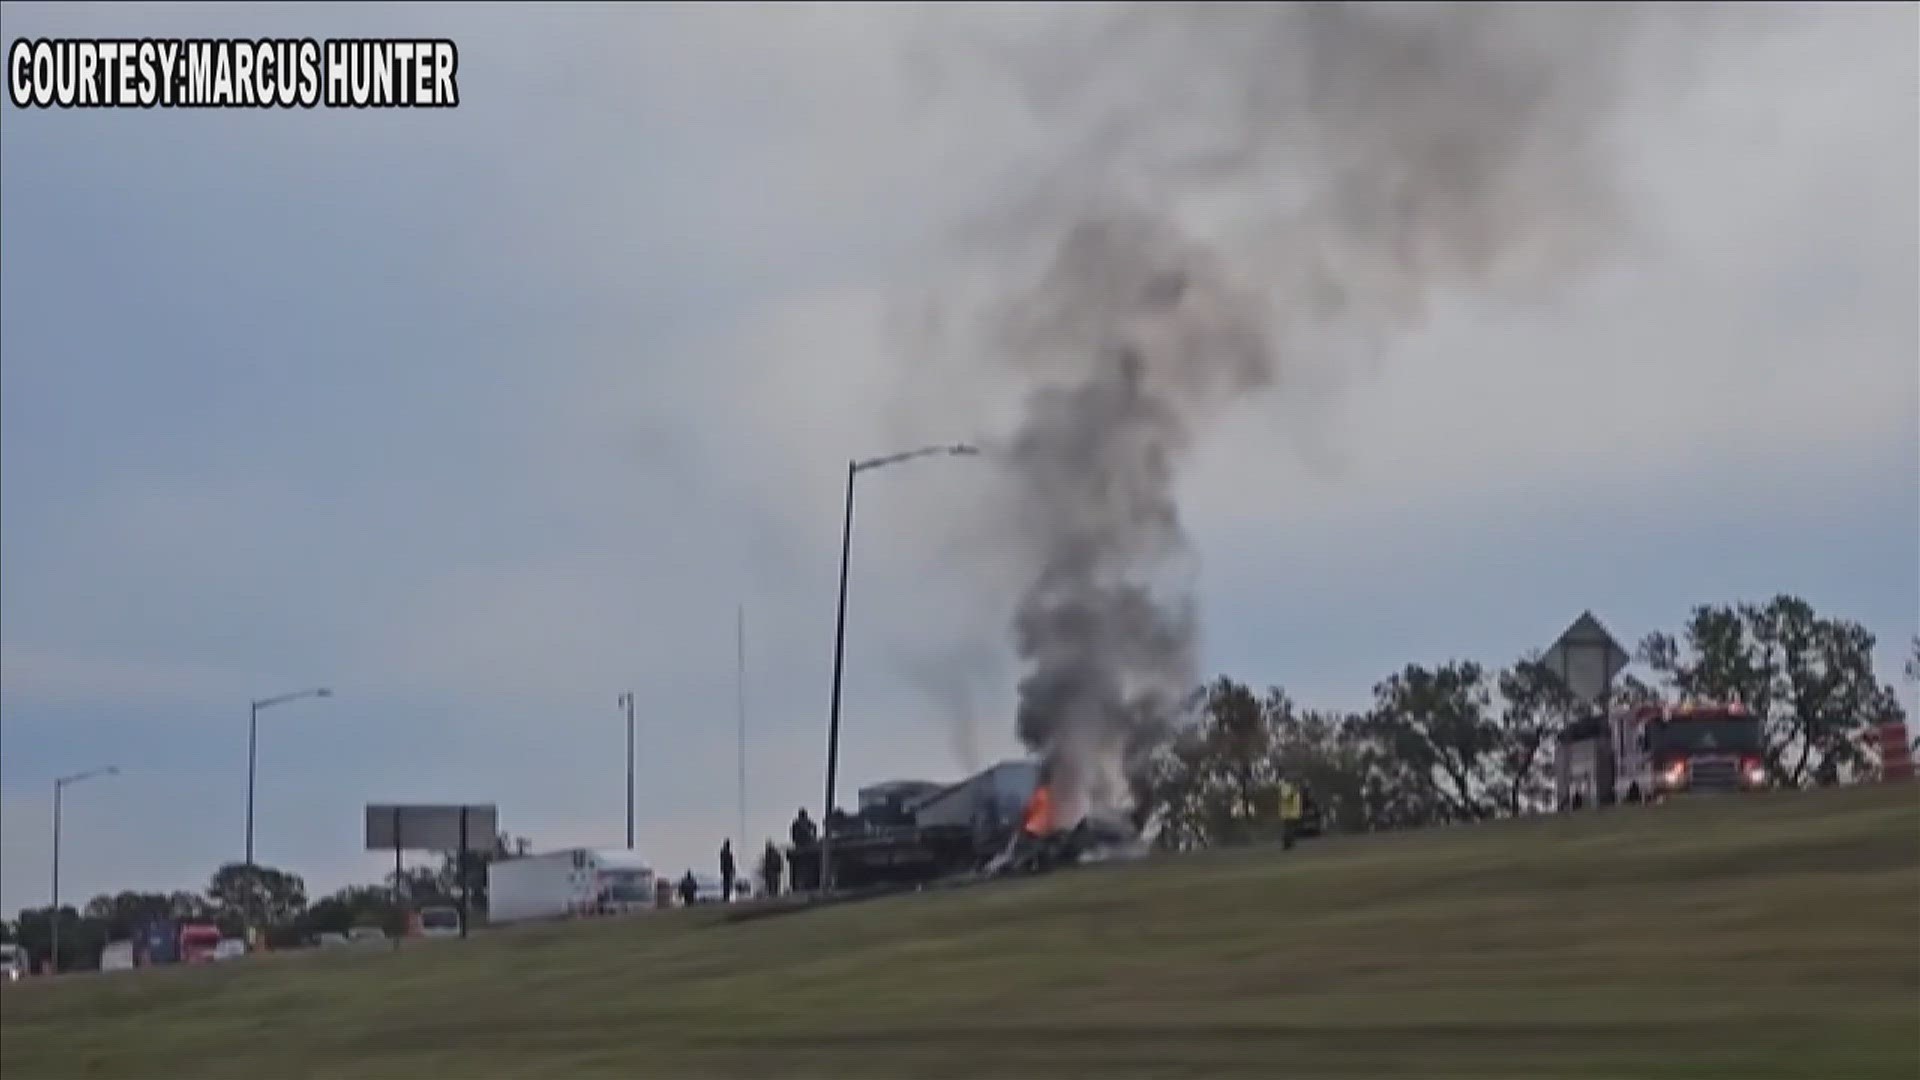 Traffic headed from Memphis into Arkansas along I-55 was stalled Monday morning due to a semi-truck on fire on Arkansas side of bridge near weigh station.